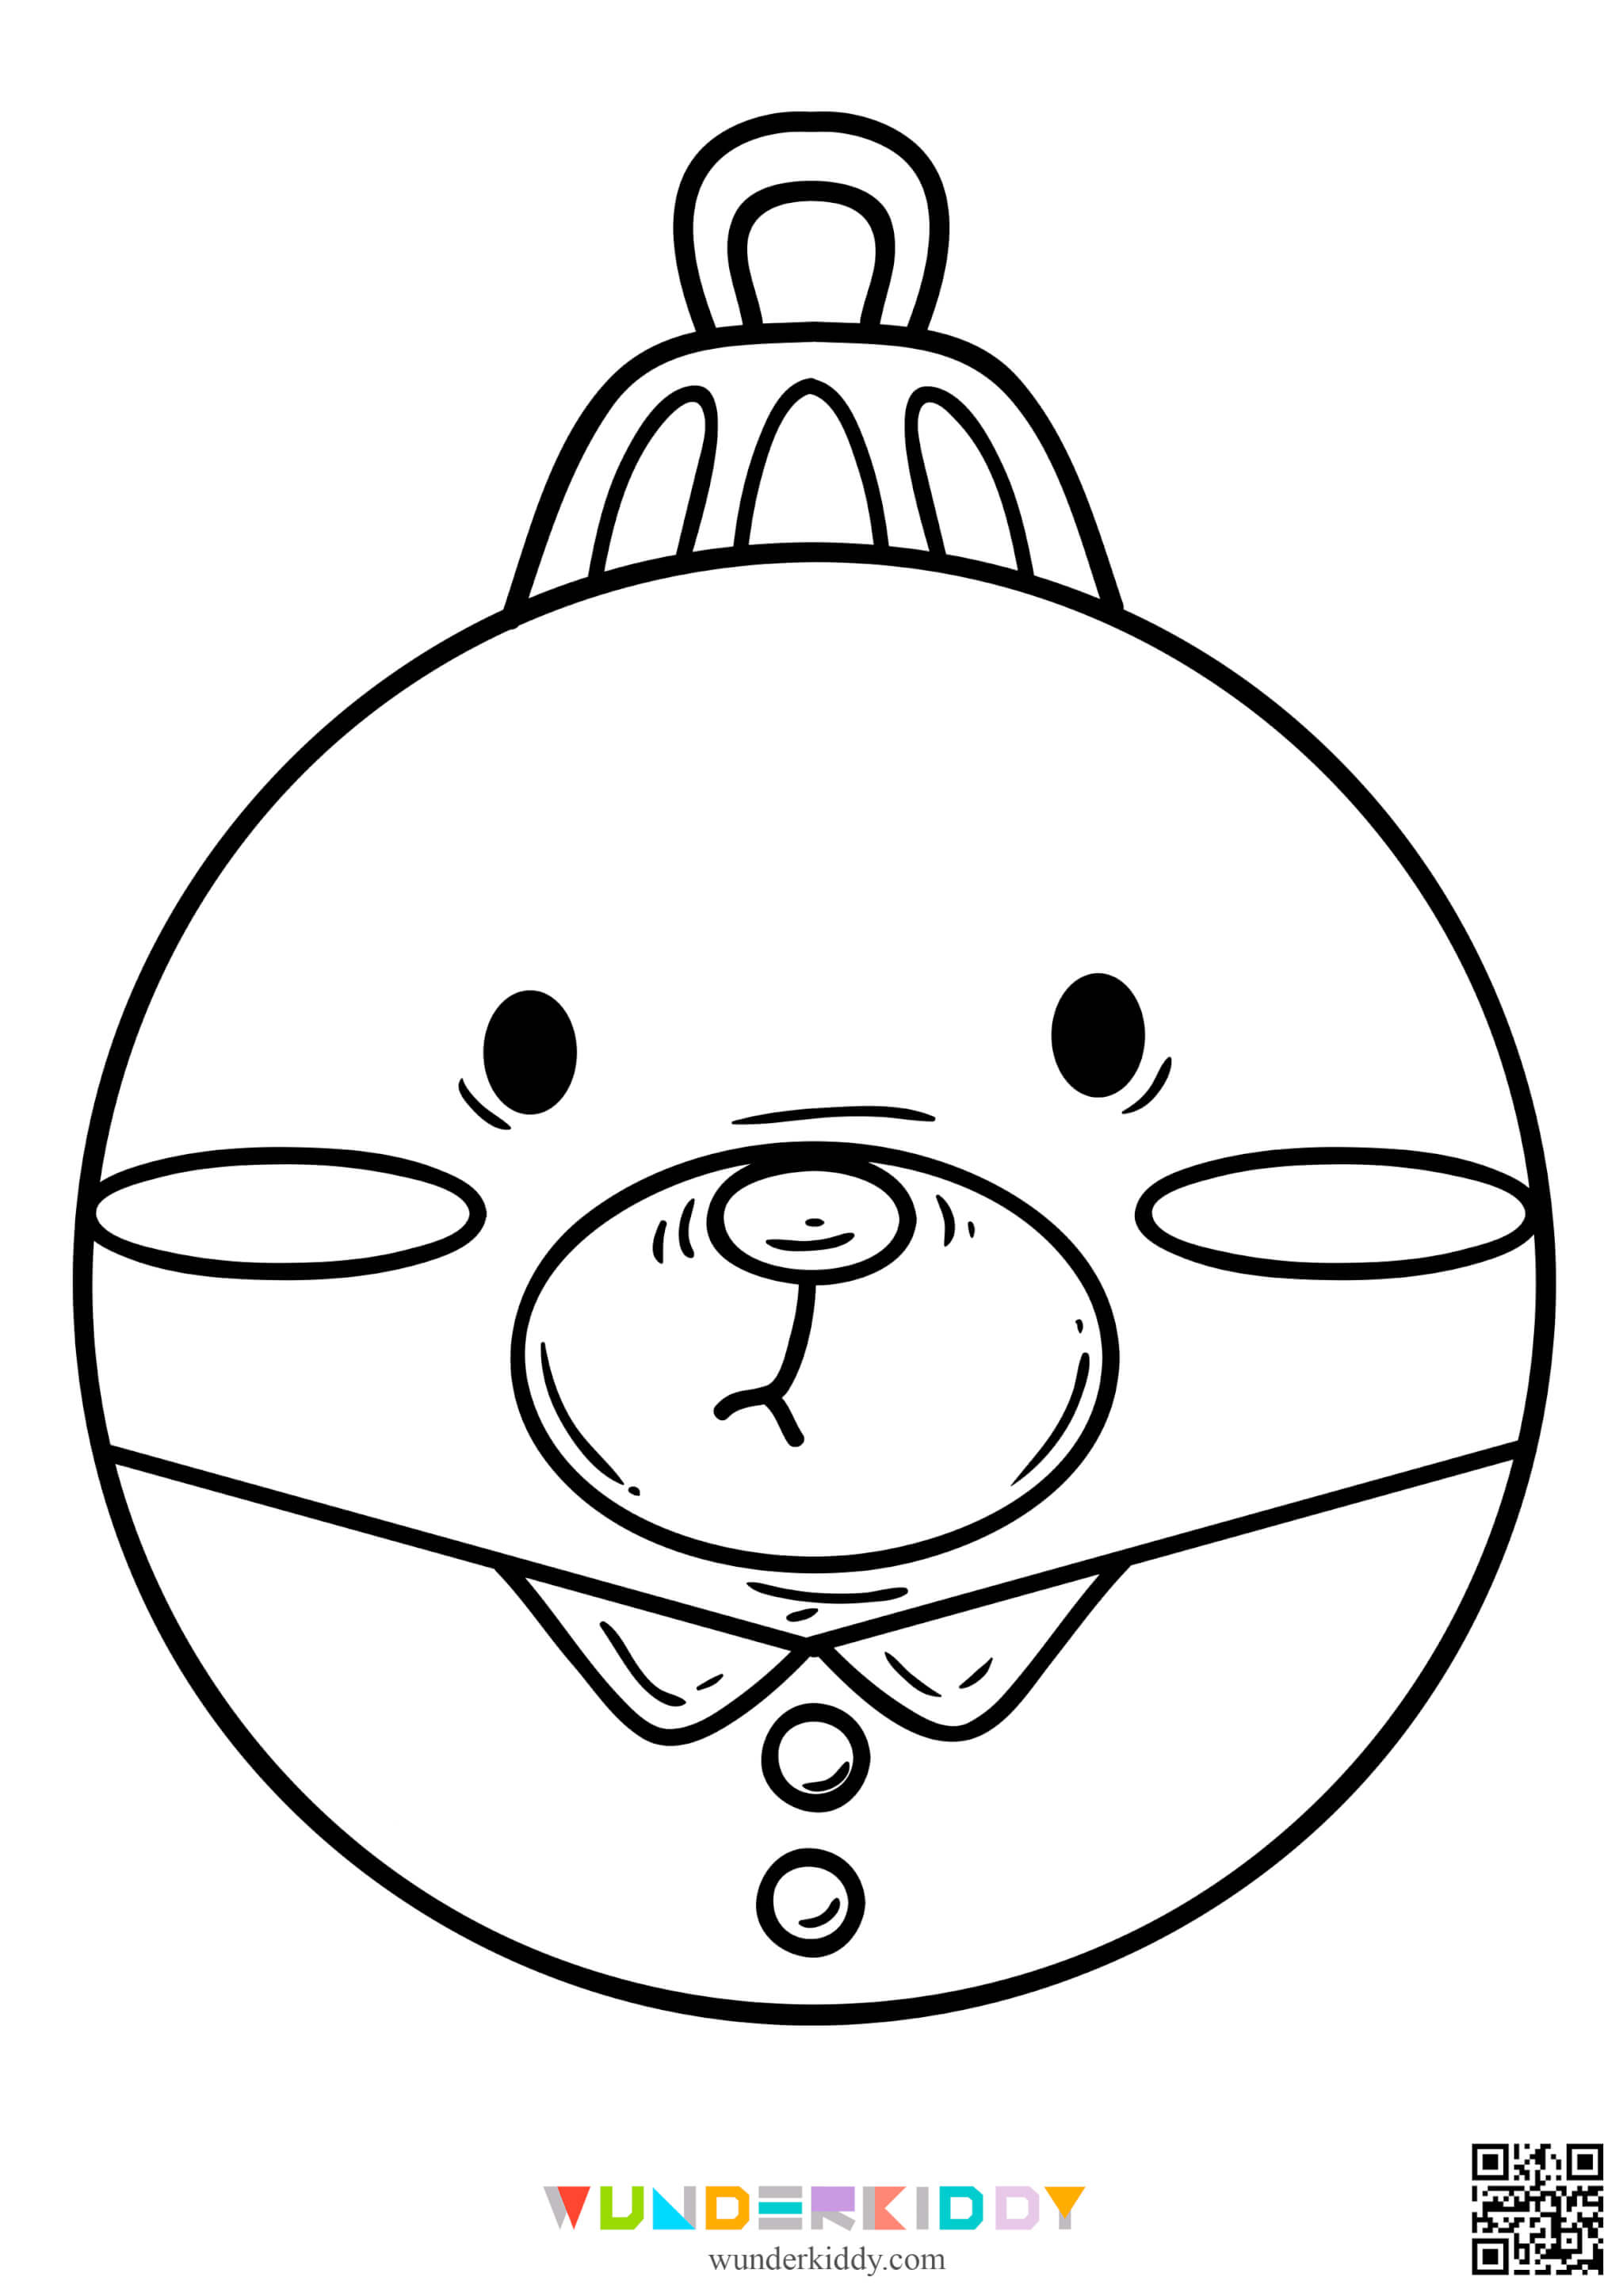 Christmas Ornament Coloring Pages - Image 5